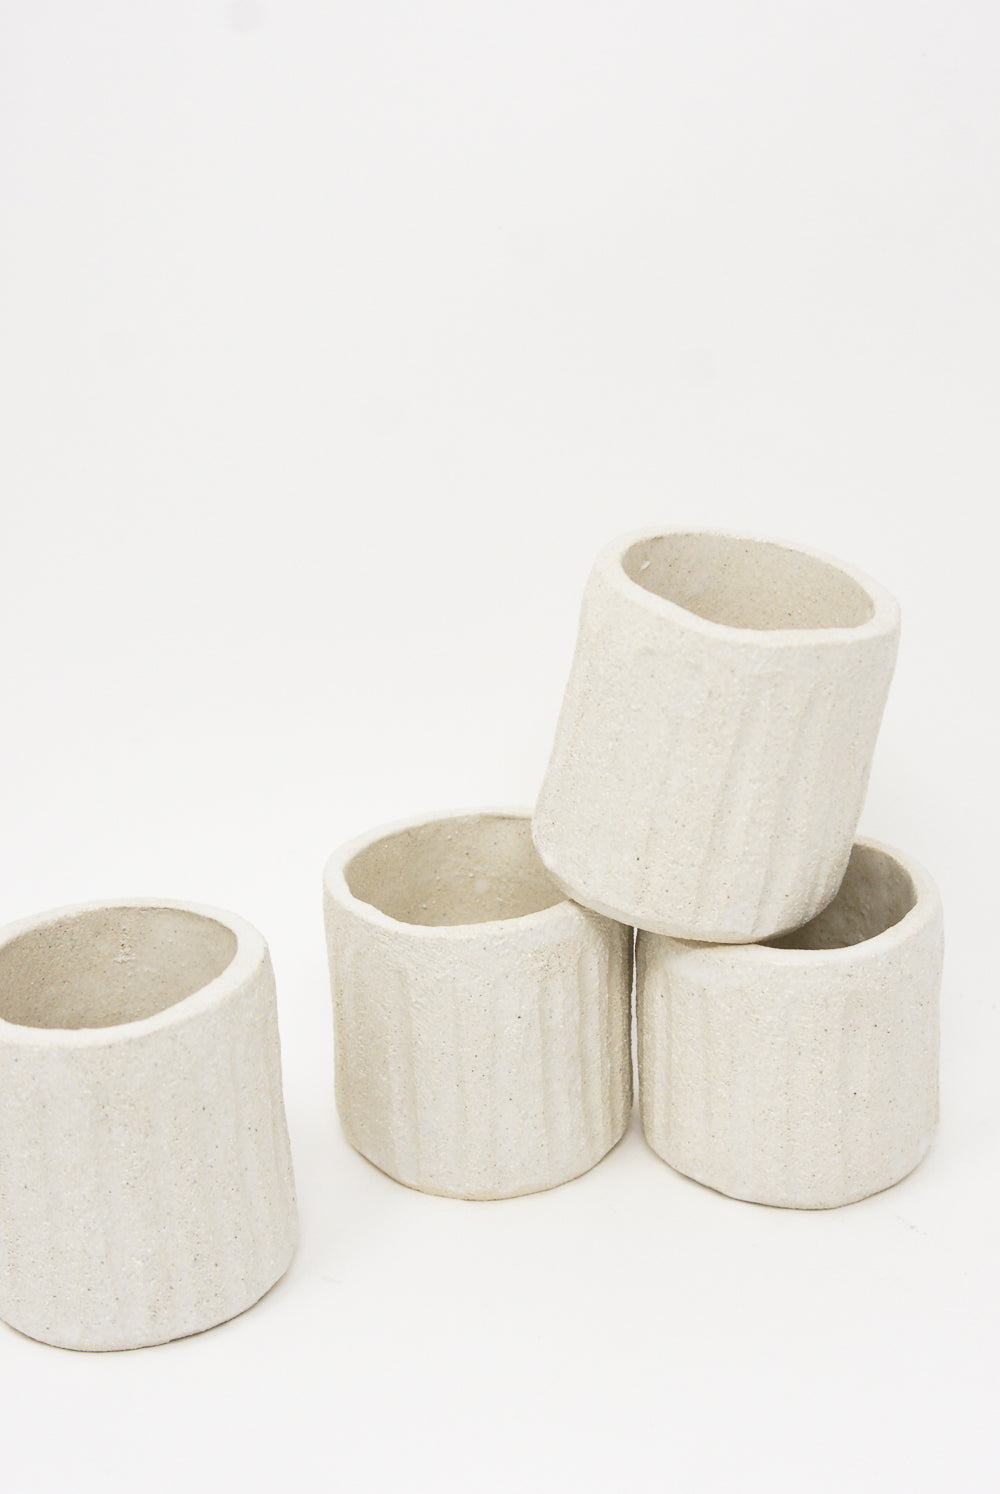 Four Tea Cups in Natural handmade in Spain on a white surface. (Brand: Clandestine)